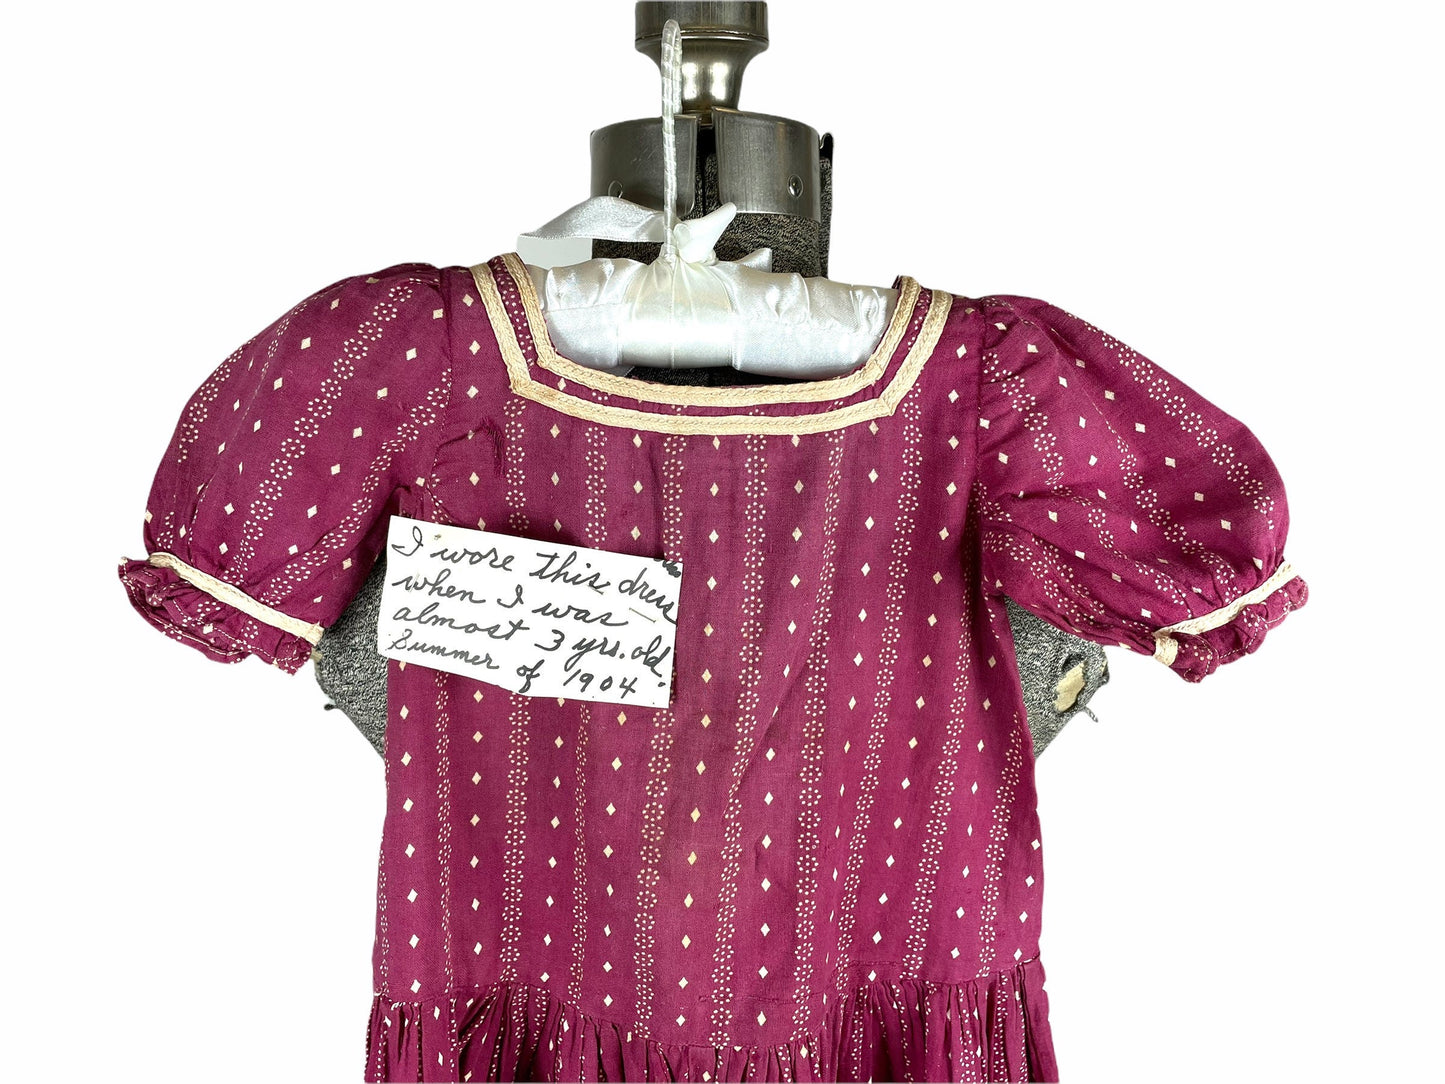 1900s Edwardian girls toddler dress cotton printed Size approx 2T